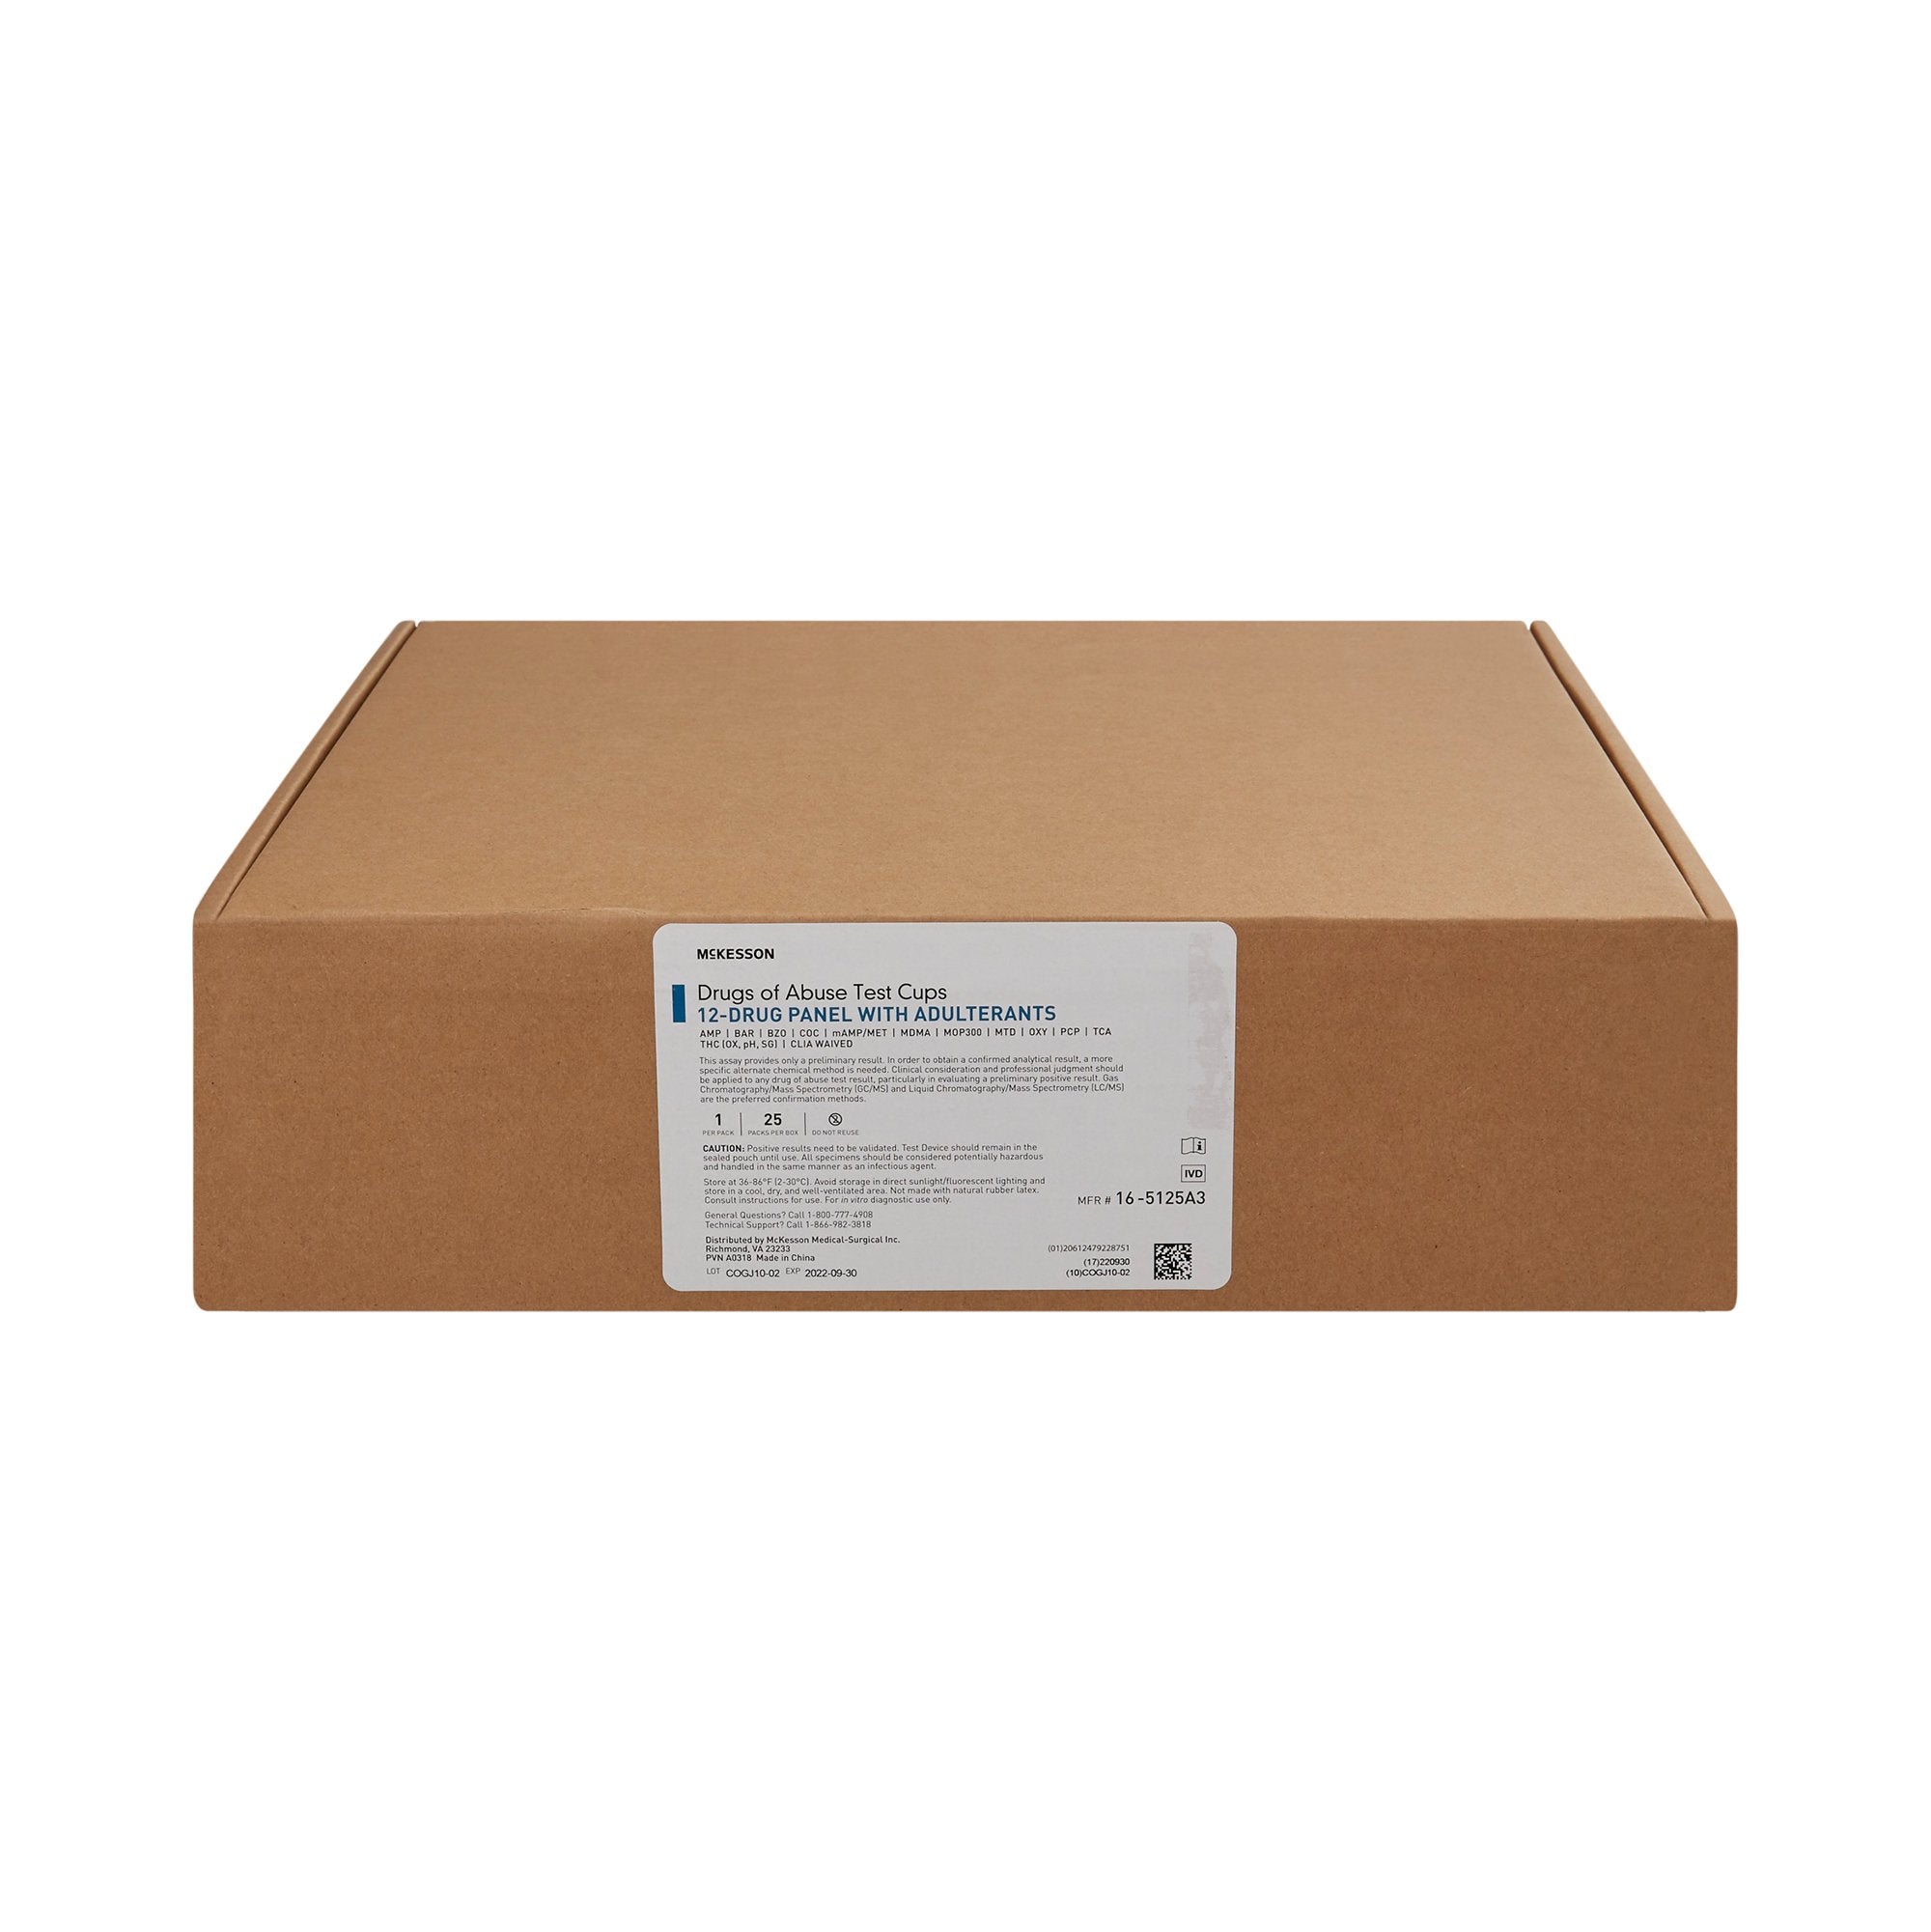 Drugs of Abuse Test Kit McKesson 12-Drug Panel with Adulterants AMP, BAR, BZO, COC, mAMP/MET, MDMA, MOP300, MTD, OXY, PCP, TCA, THC (OX, pH, SG) Urine Sample 25 Tests CLIA Waived